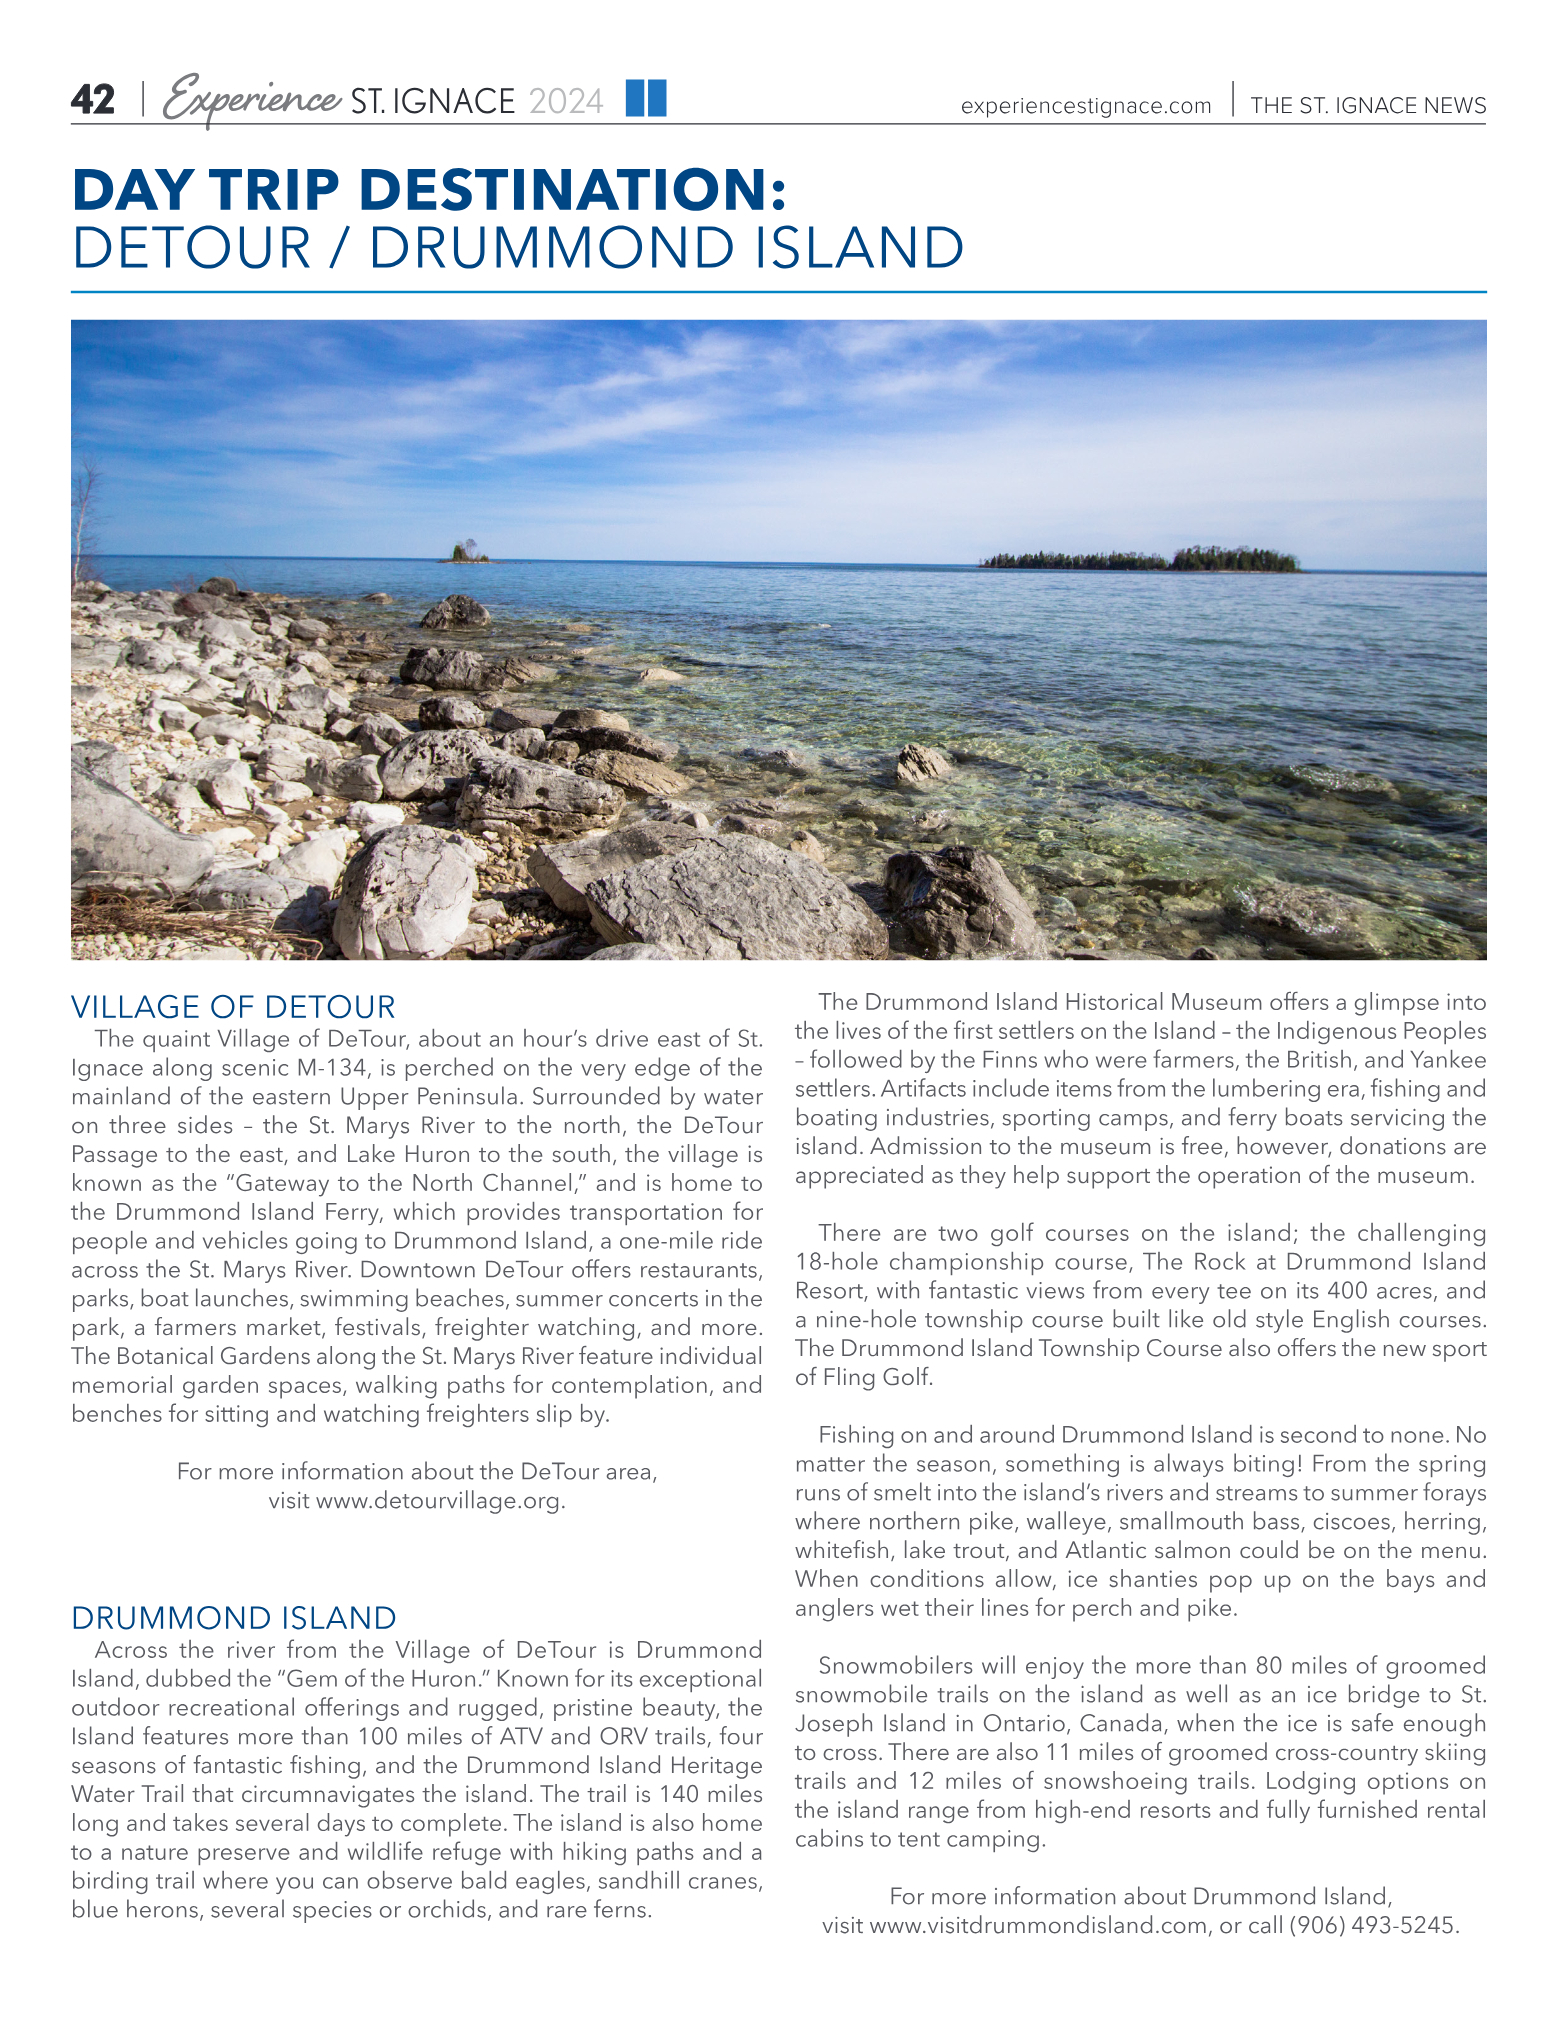 Experience St. Ignace - Guest Travel Guide 2024 - page 42